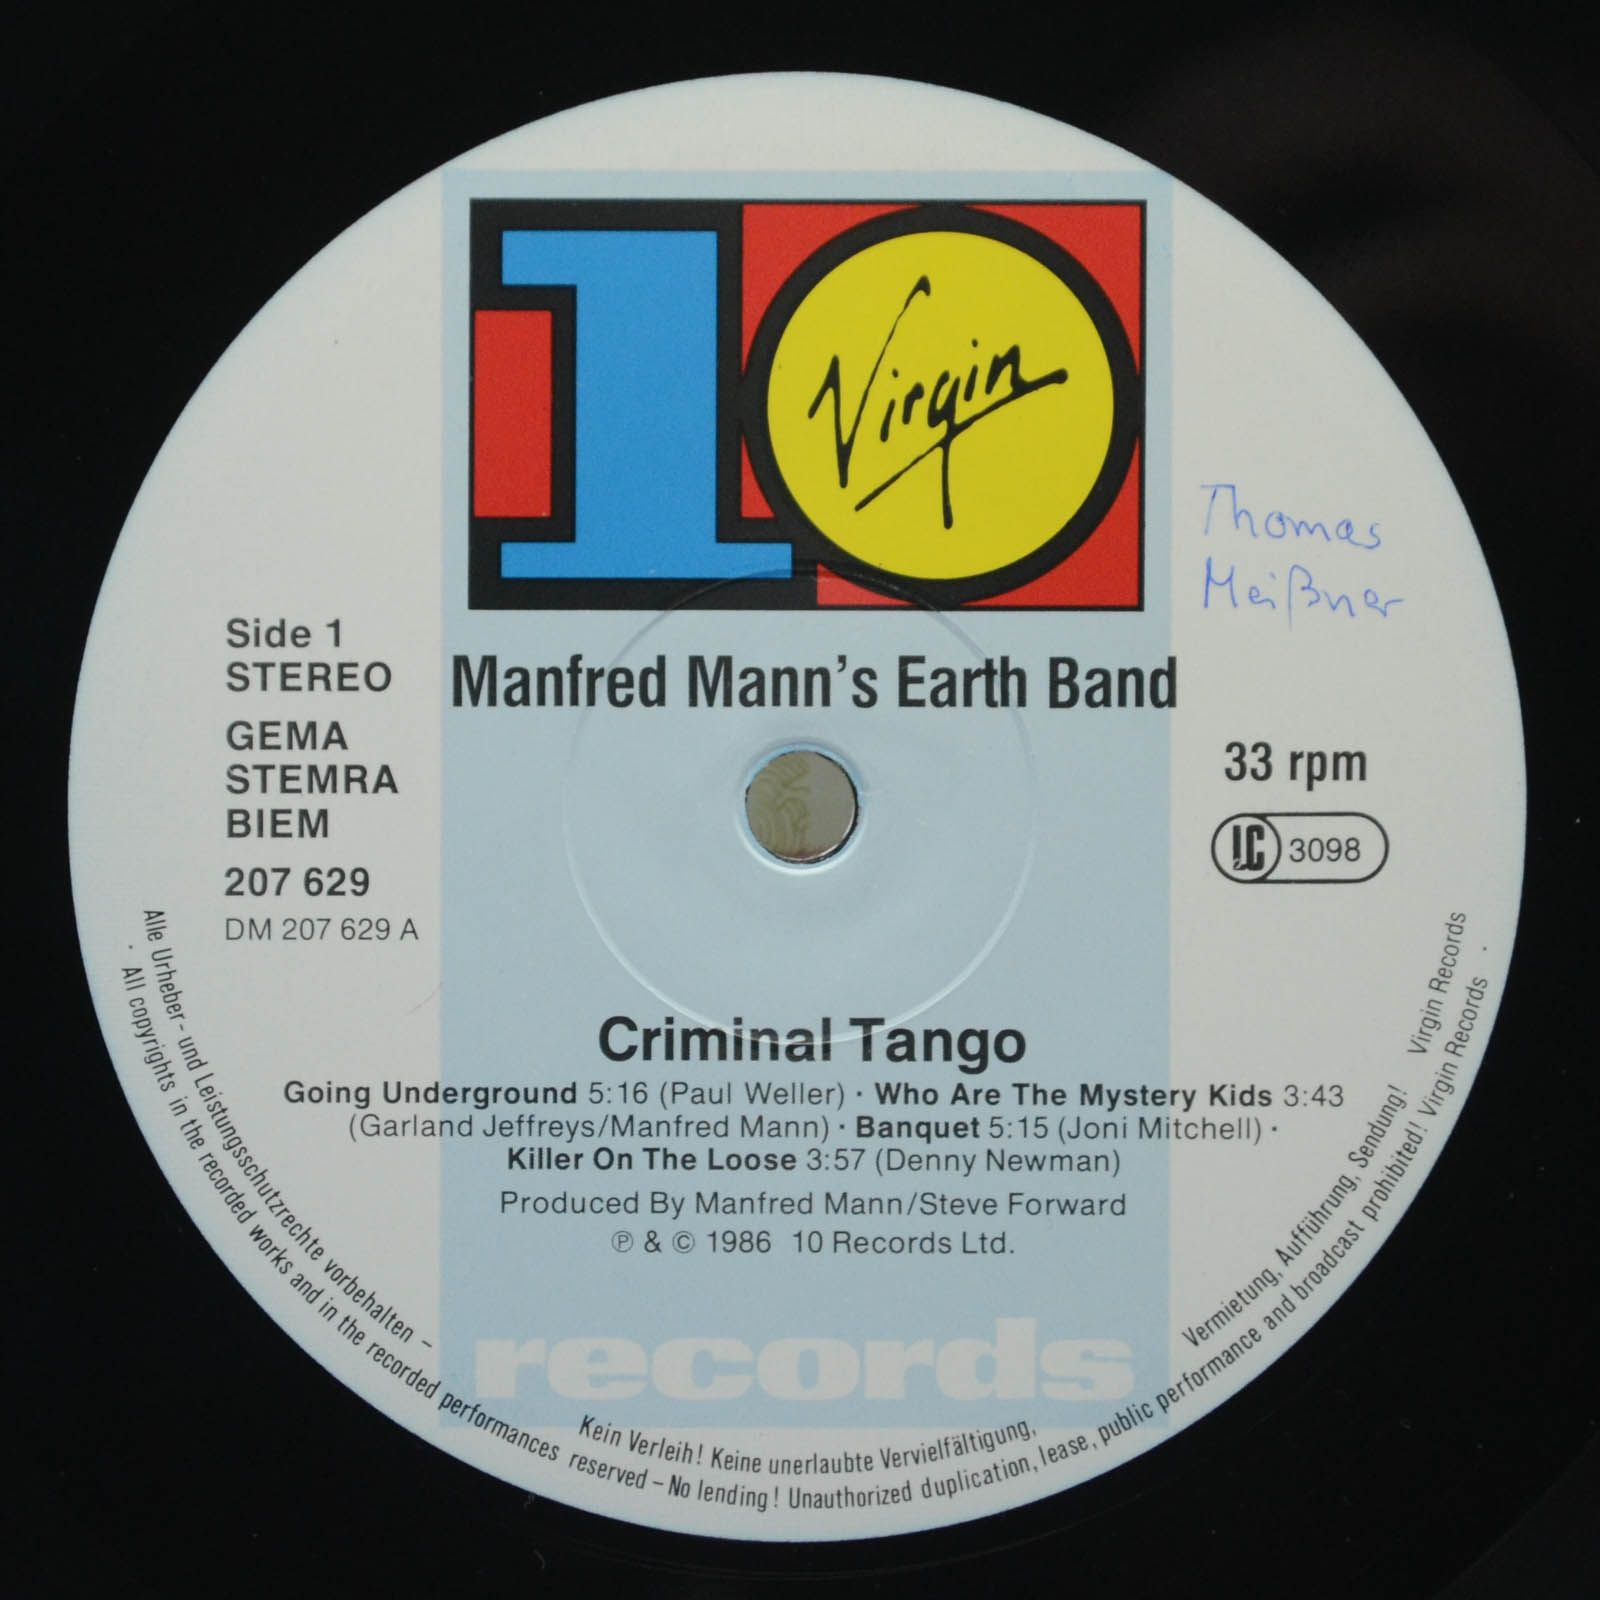 Manfred Mann's Earth Band With Chris Thompson — Criminal Tango, 1986